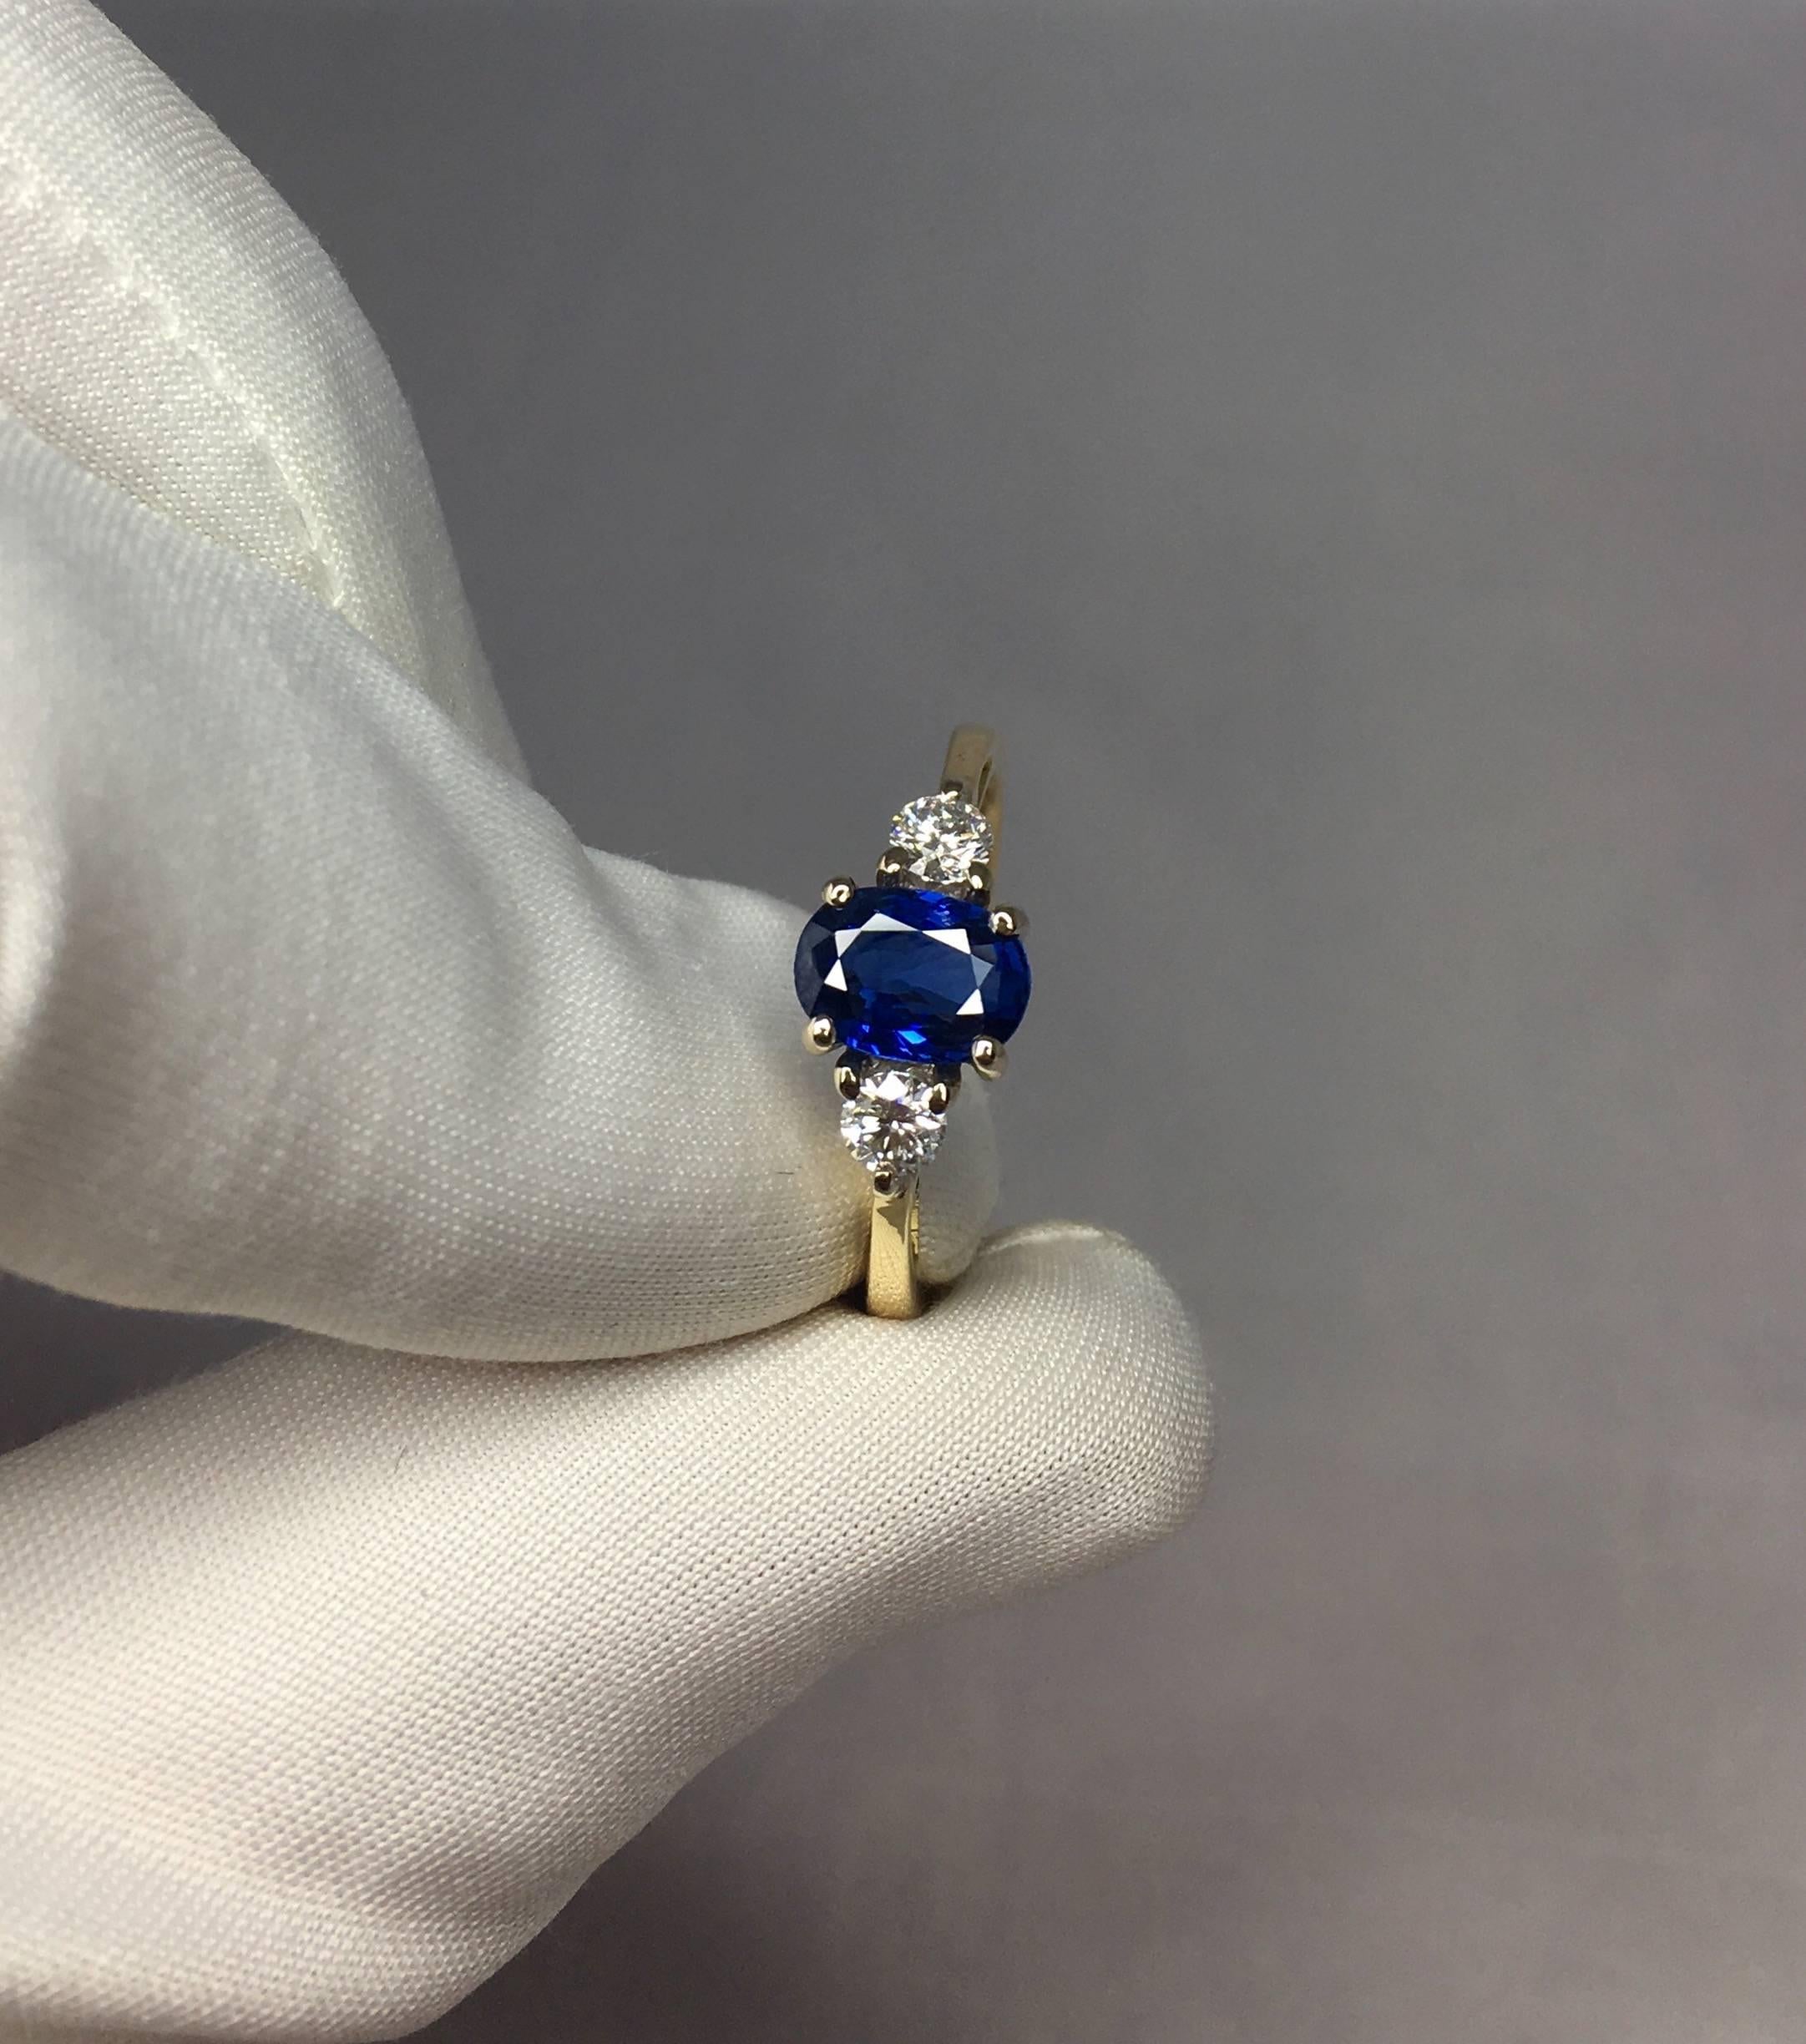 Stunning natural deep blue Ceylon sapphire set in a fine 18k gold ring. White gold claw heads and a yellow gold band.

1.00 carat centre sapphire with a fine deep blue colour and excellent clarity. 

Totally untreated and unheated, comes with full